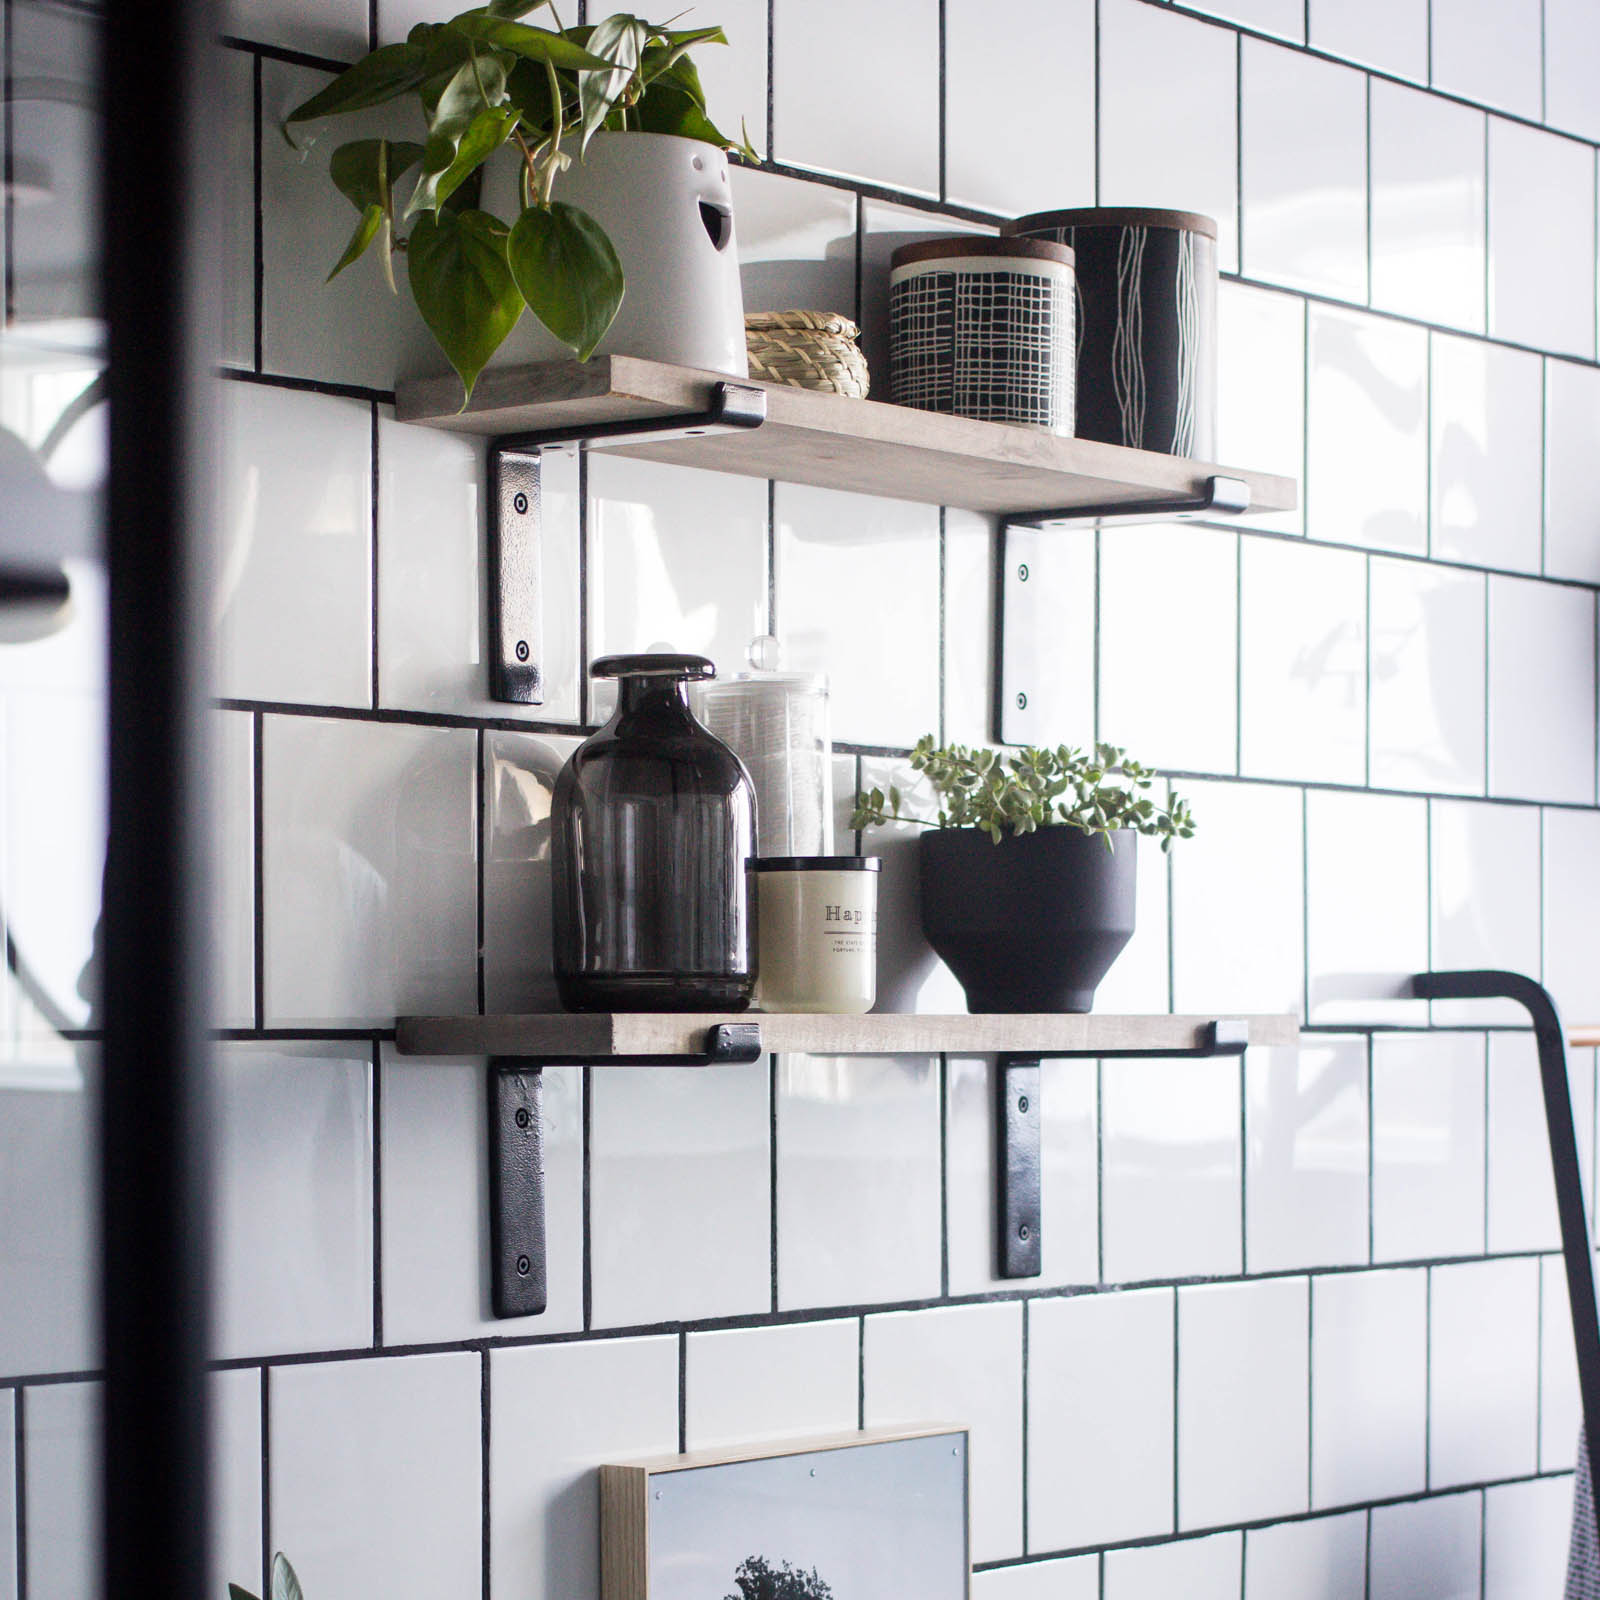 Love the look of this simple bathroom shelving! The open shelving is beautiful and so easy to build! Get tips and tricks for drilling into tile too! Love the modern bathroom design. #moderndesign #bathroom #DIY